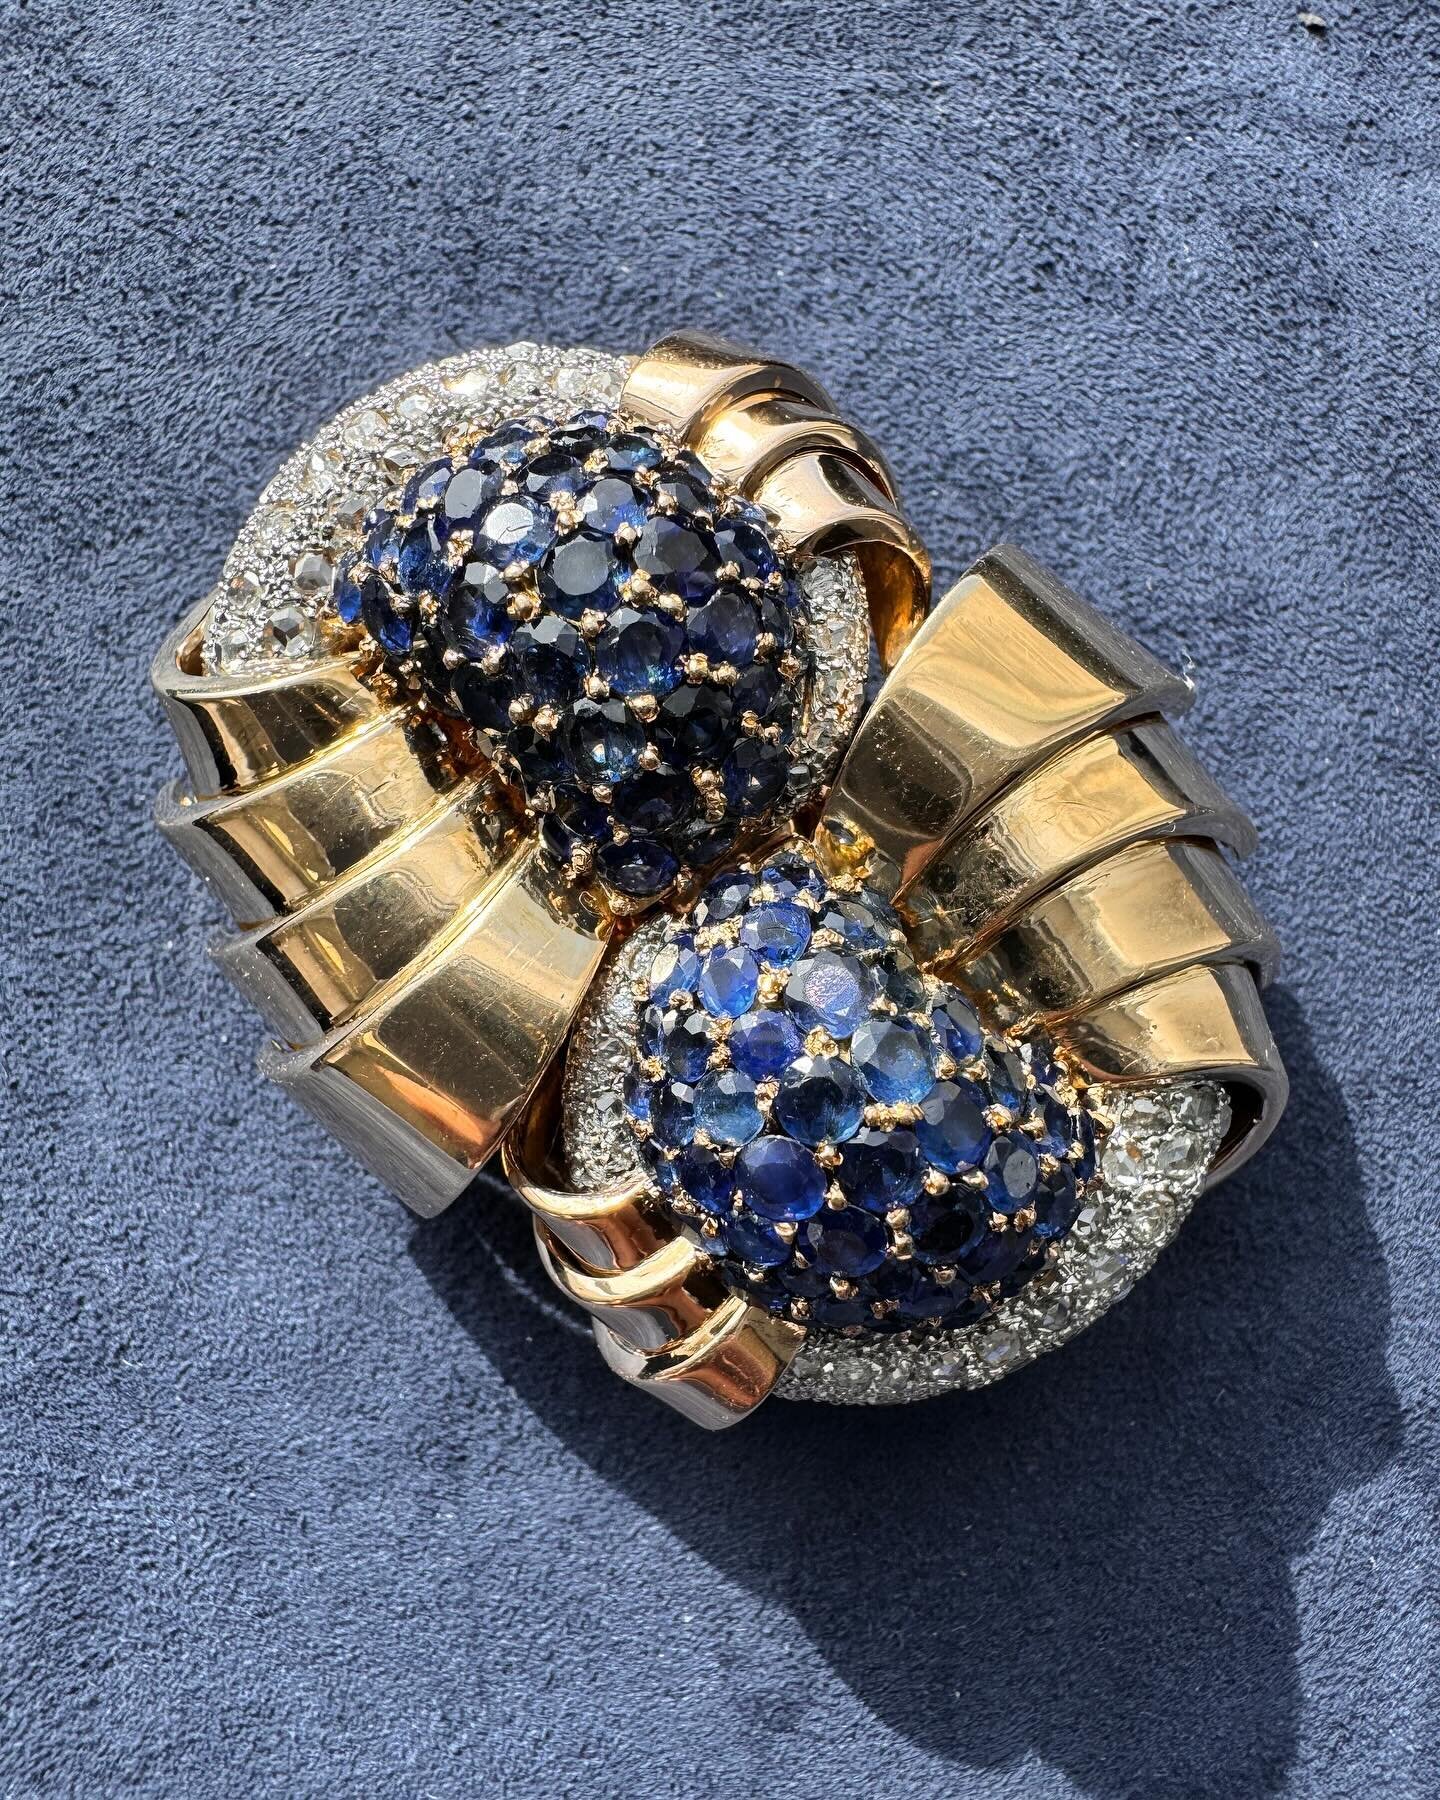 Beautiful retro double clip made in 18k gold with rose cut diamonds and sapphires. @terrafinejewelry #terrafinejewelry #estatejewelry #vintagejewelry #retrojewelry #downtownmiami #dupontbuilding